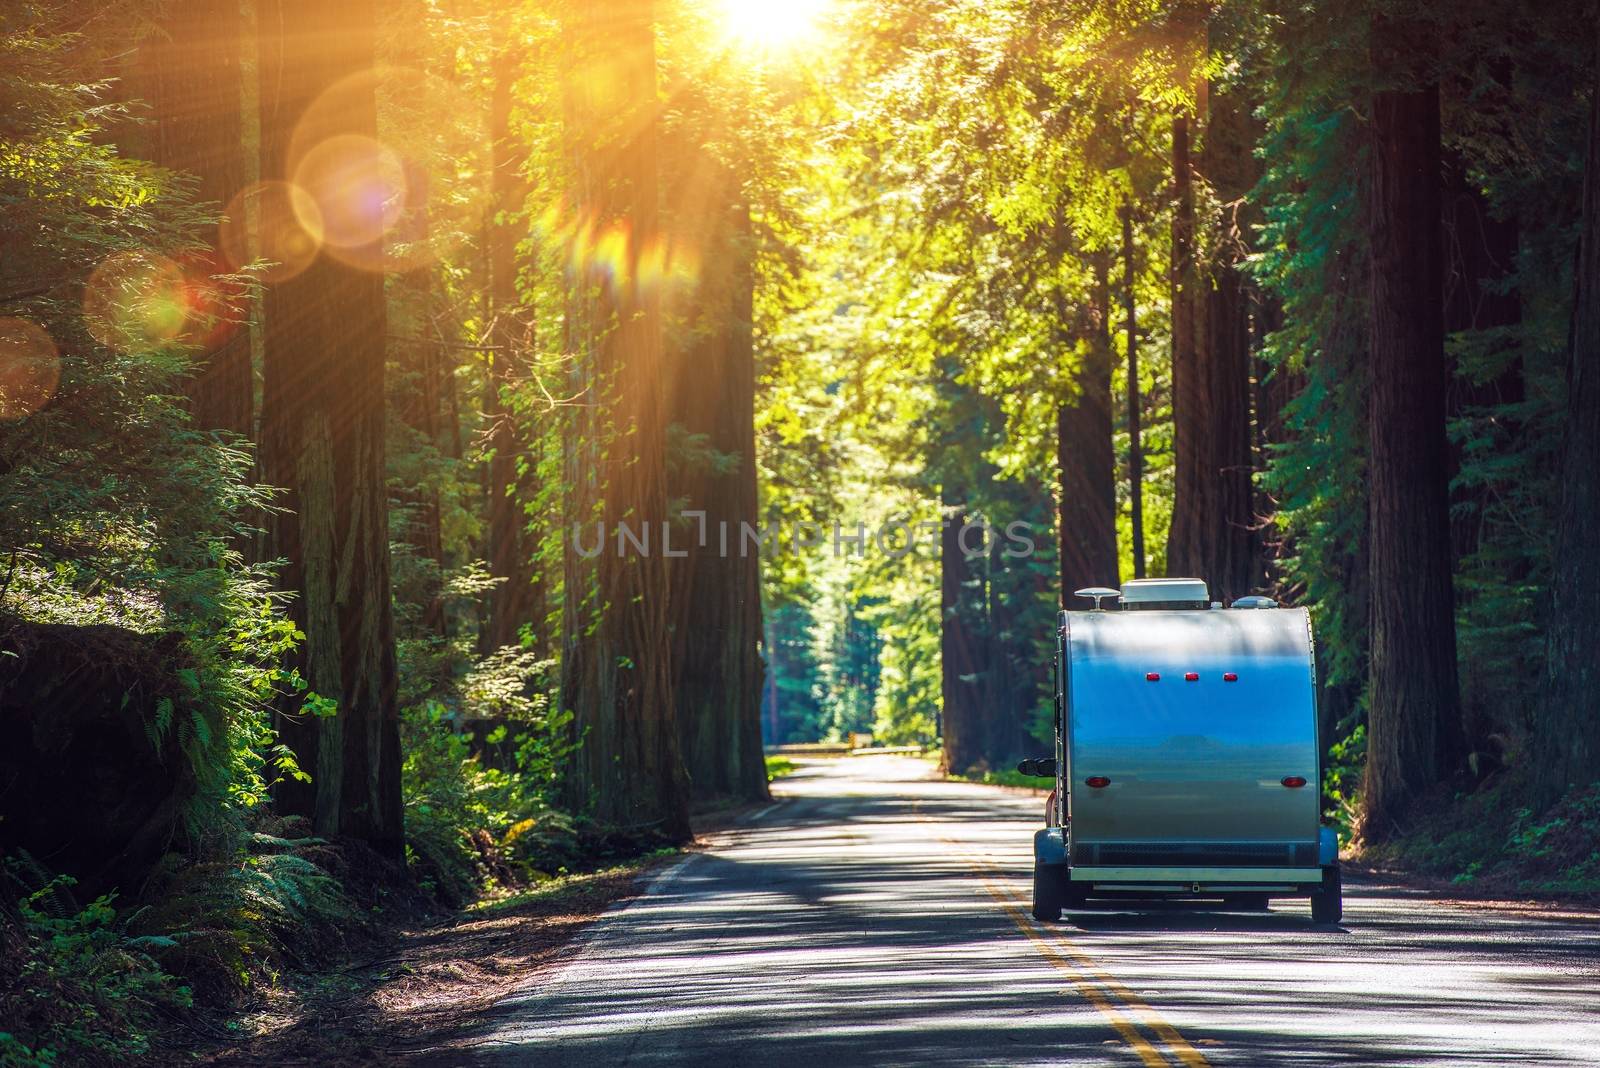 Camping in Redwoods by welcomia